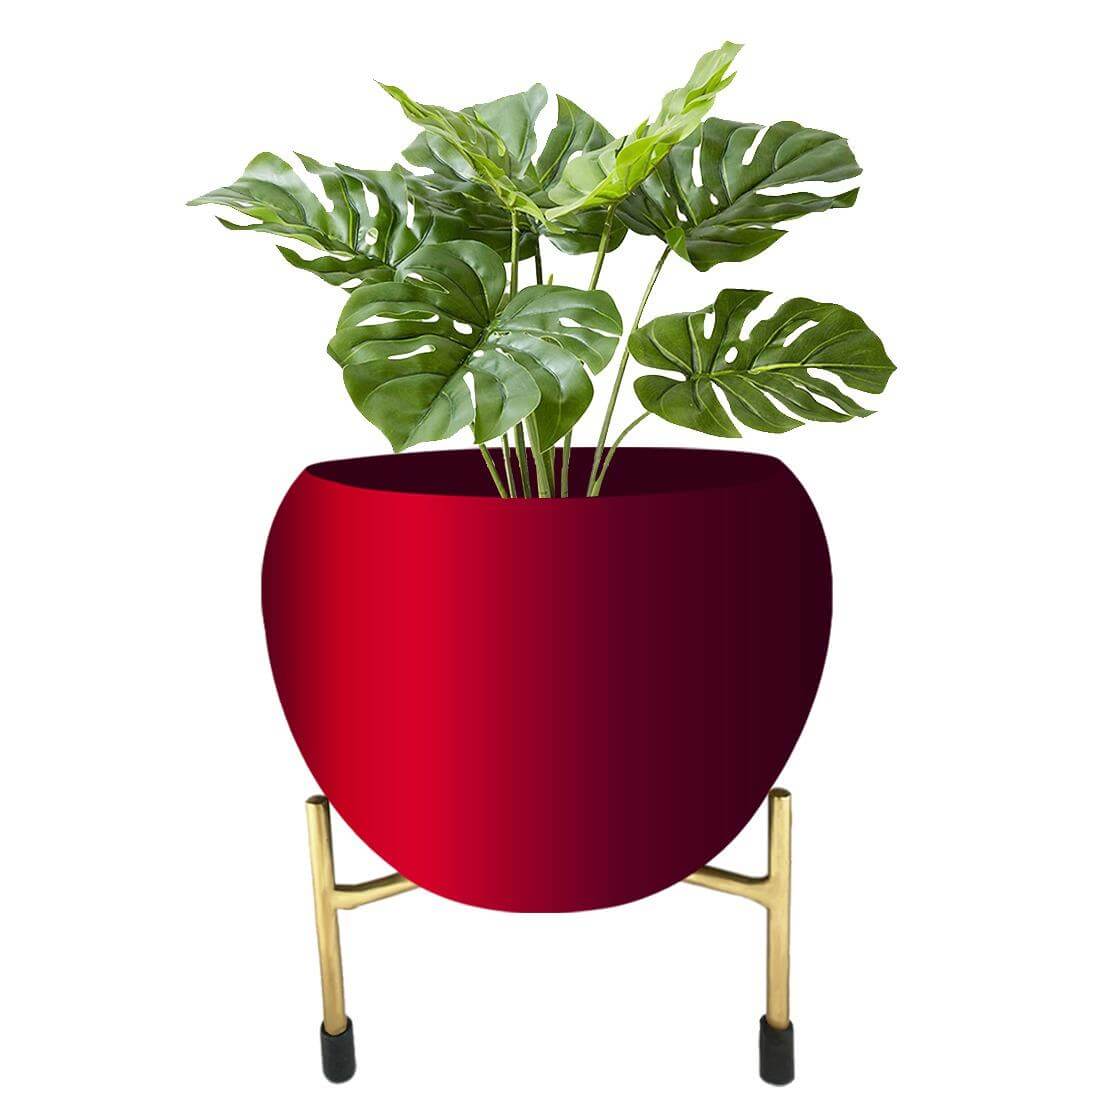 APPLE DESIGN FLOWER POT CHERRY WITH STAND